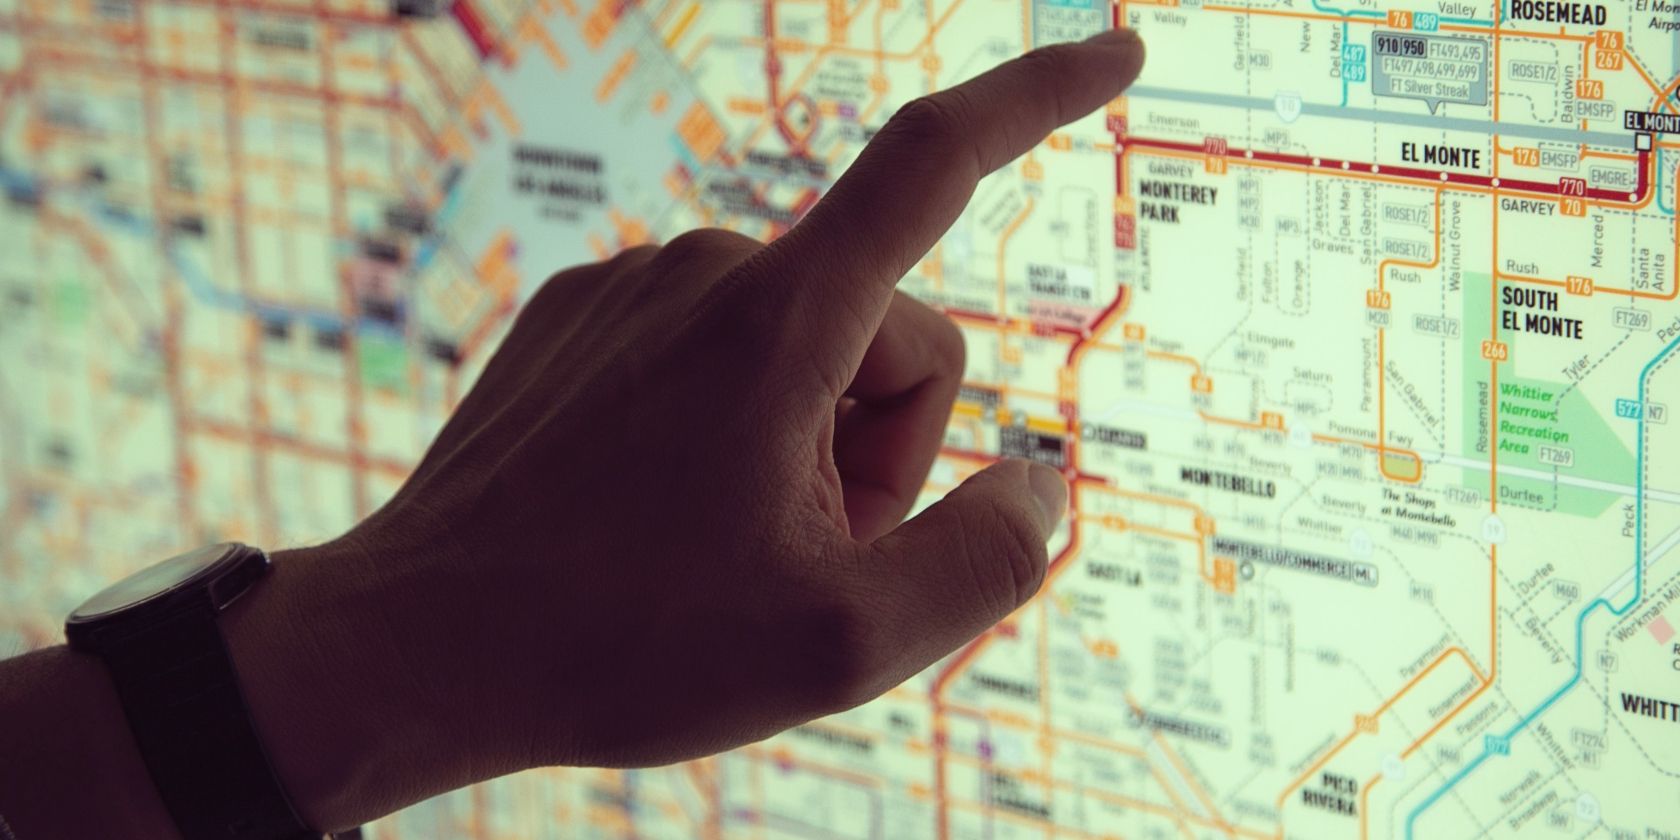 A hand pointing at a digital map on the wall